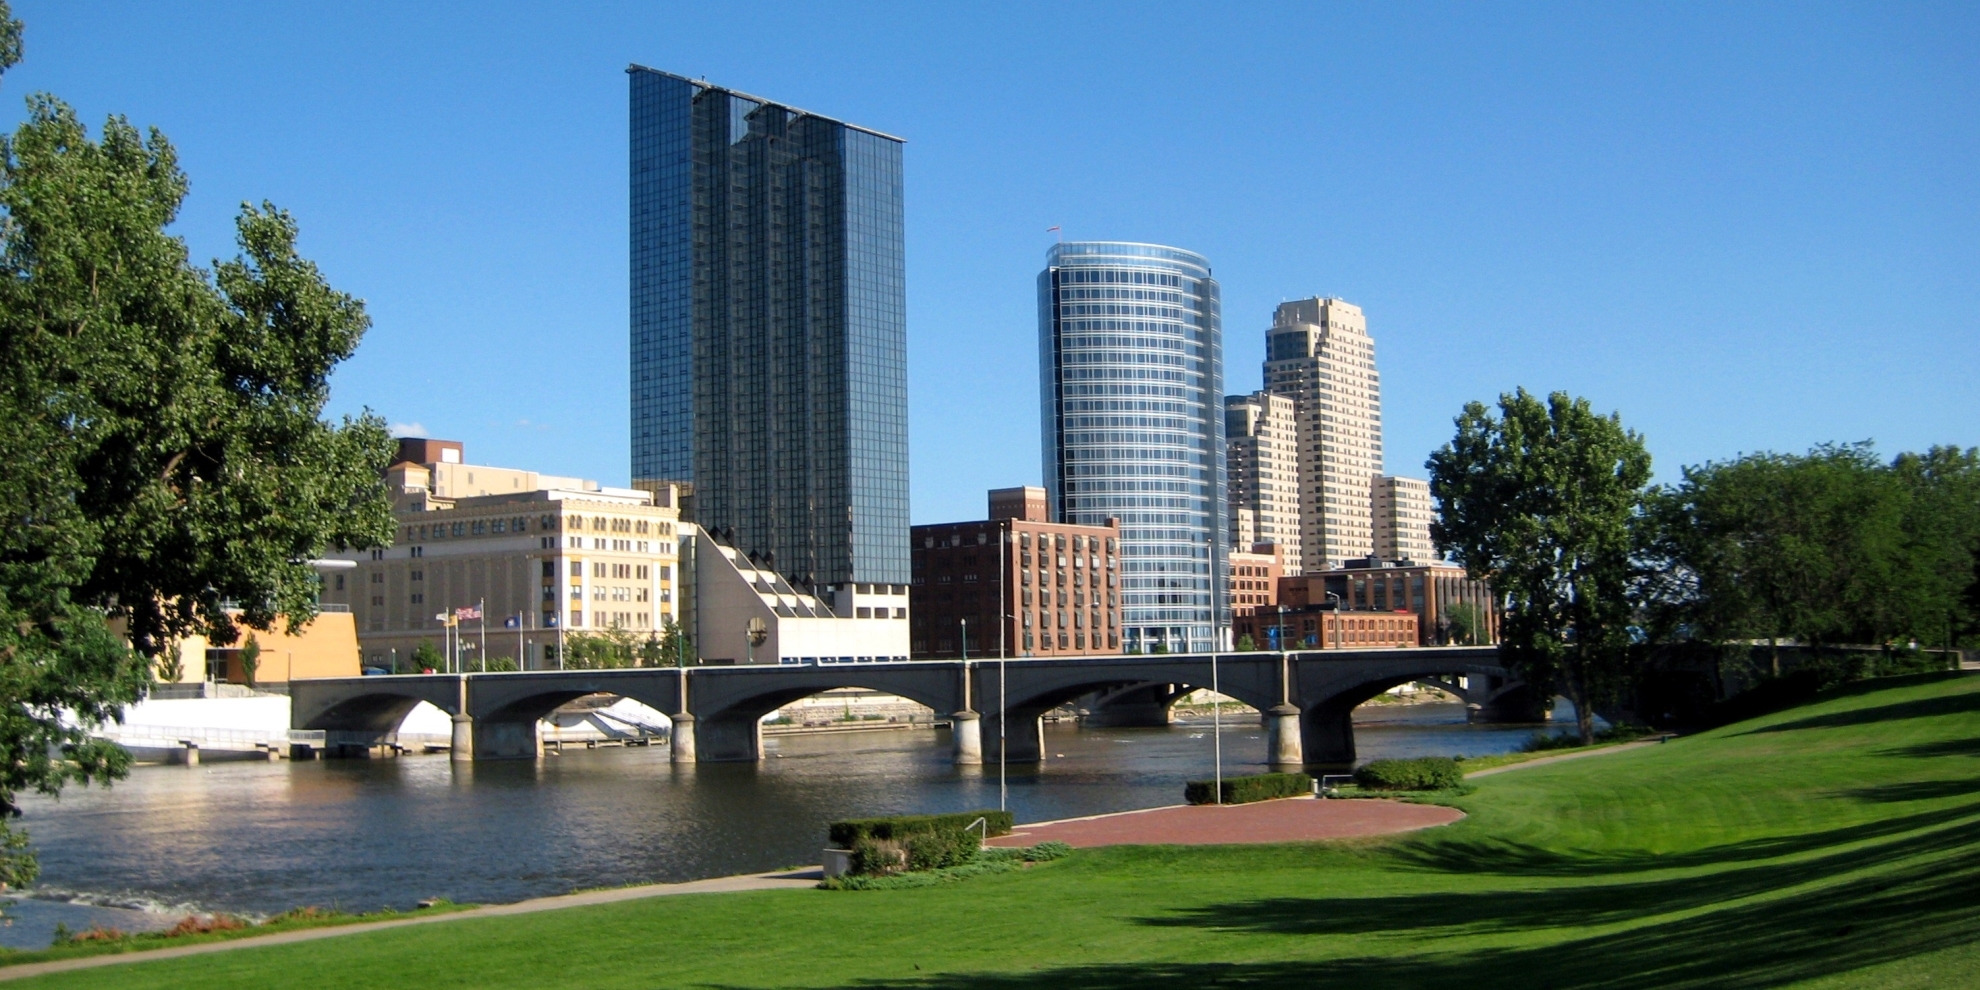 Two sides of the Grand River in Grand Rapids, Michigan